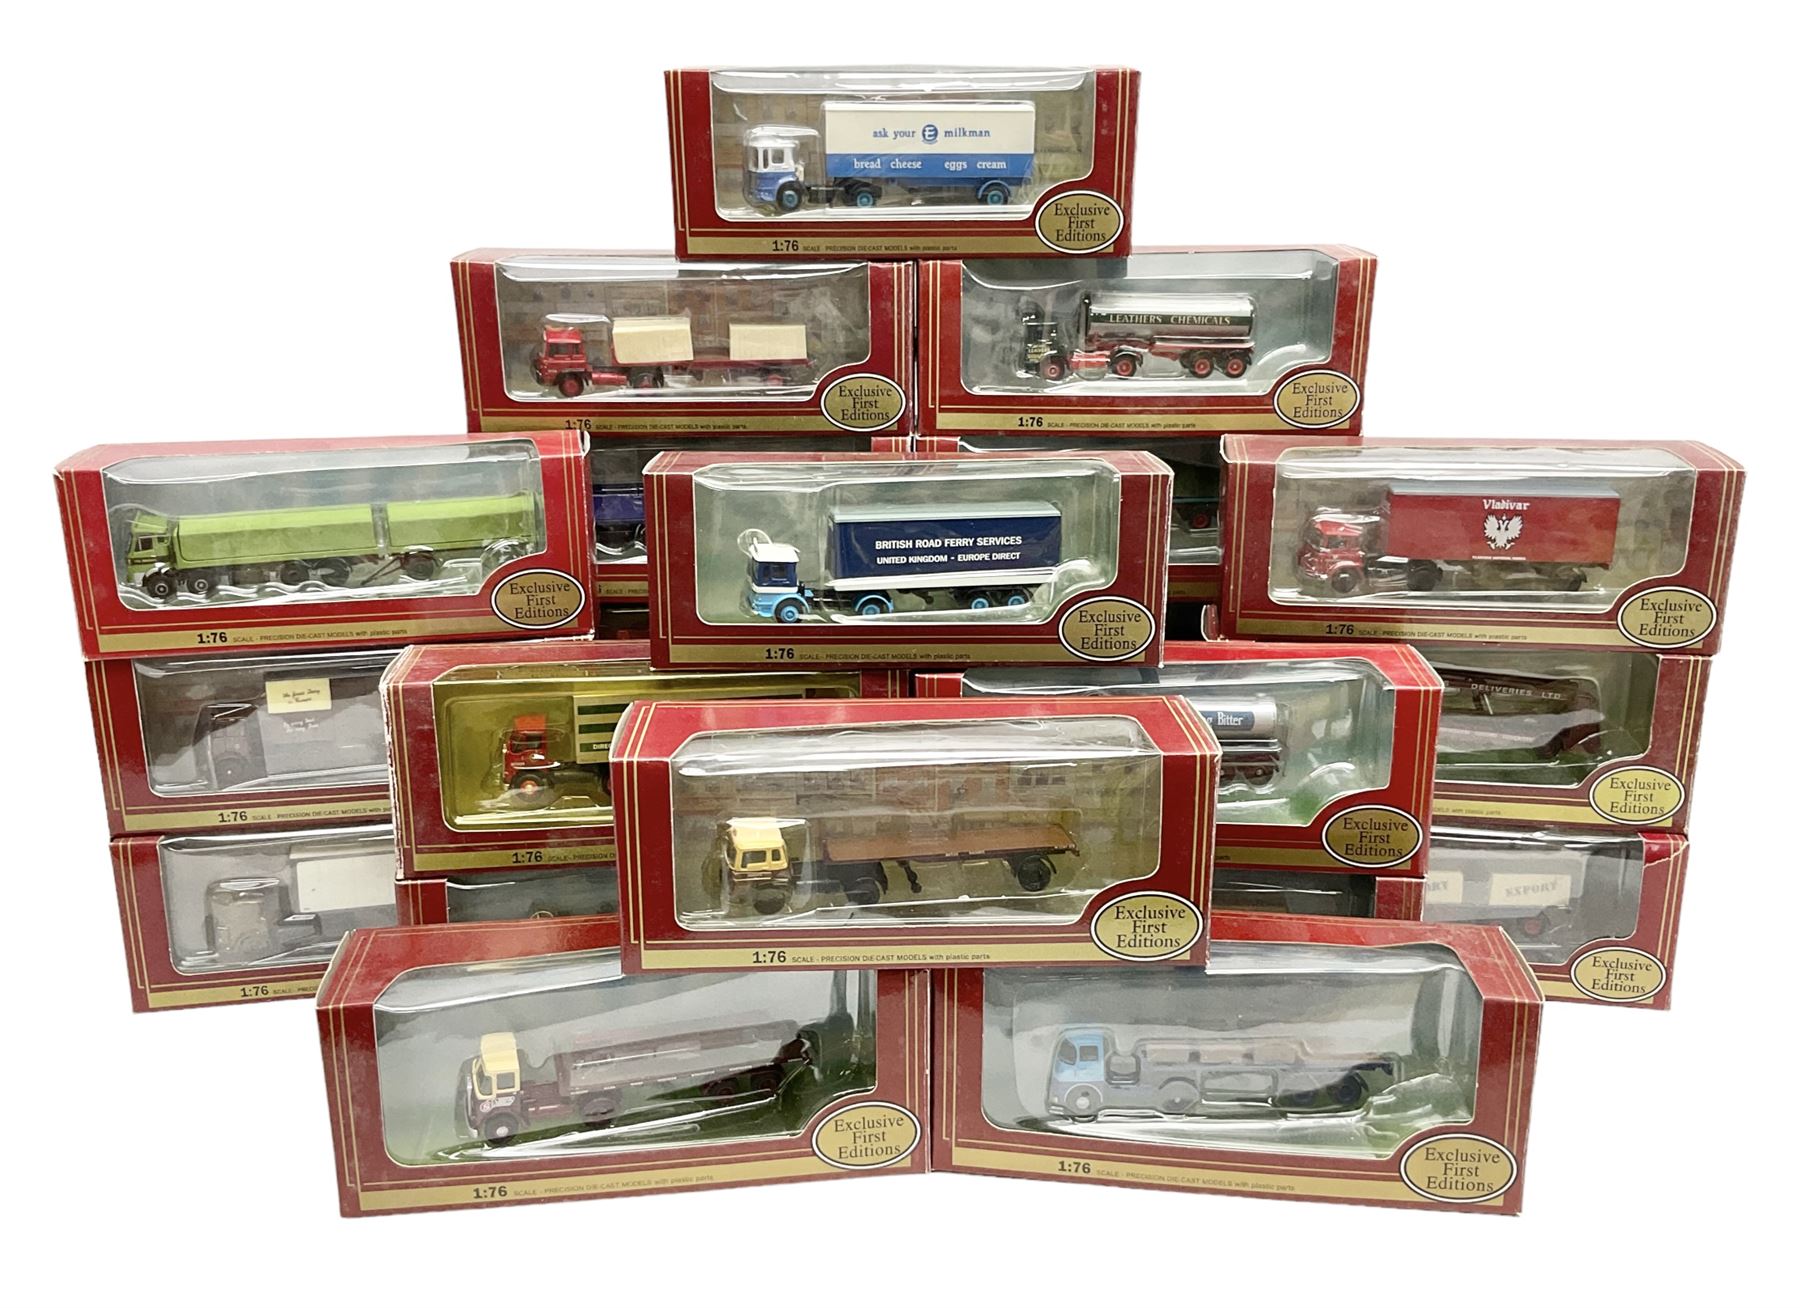 Twenty-three Exclusive First Editions Commercials 1:76 scale die-cast models